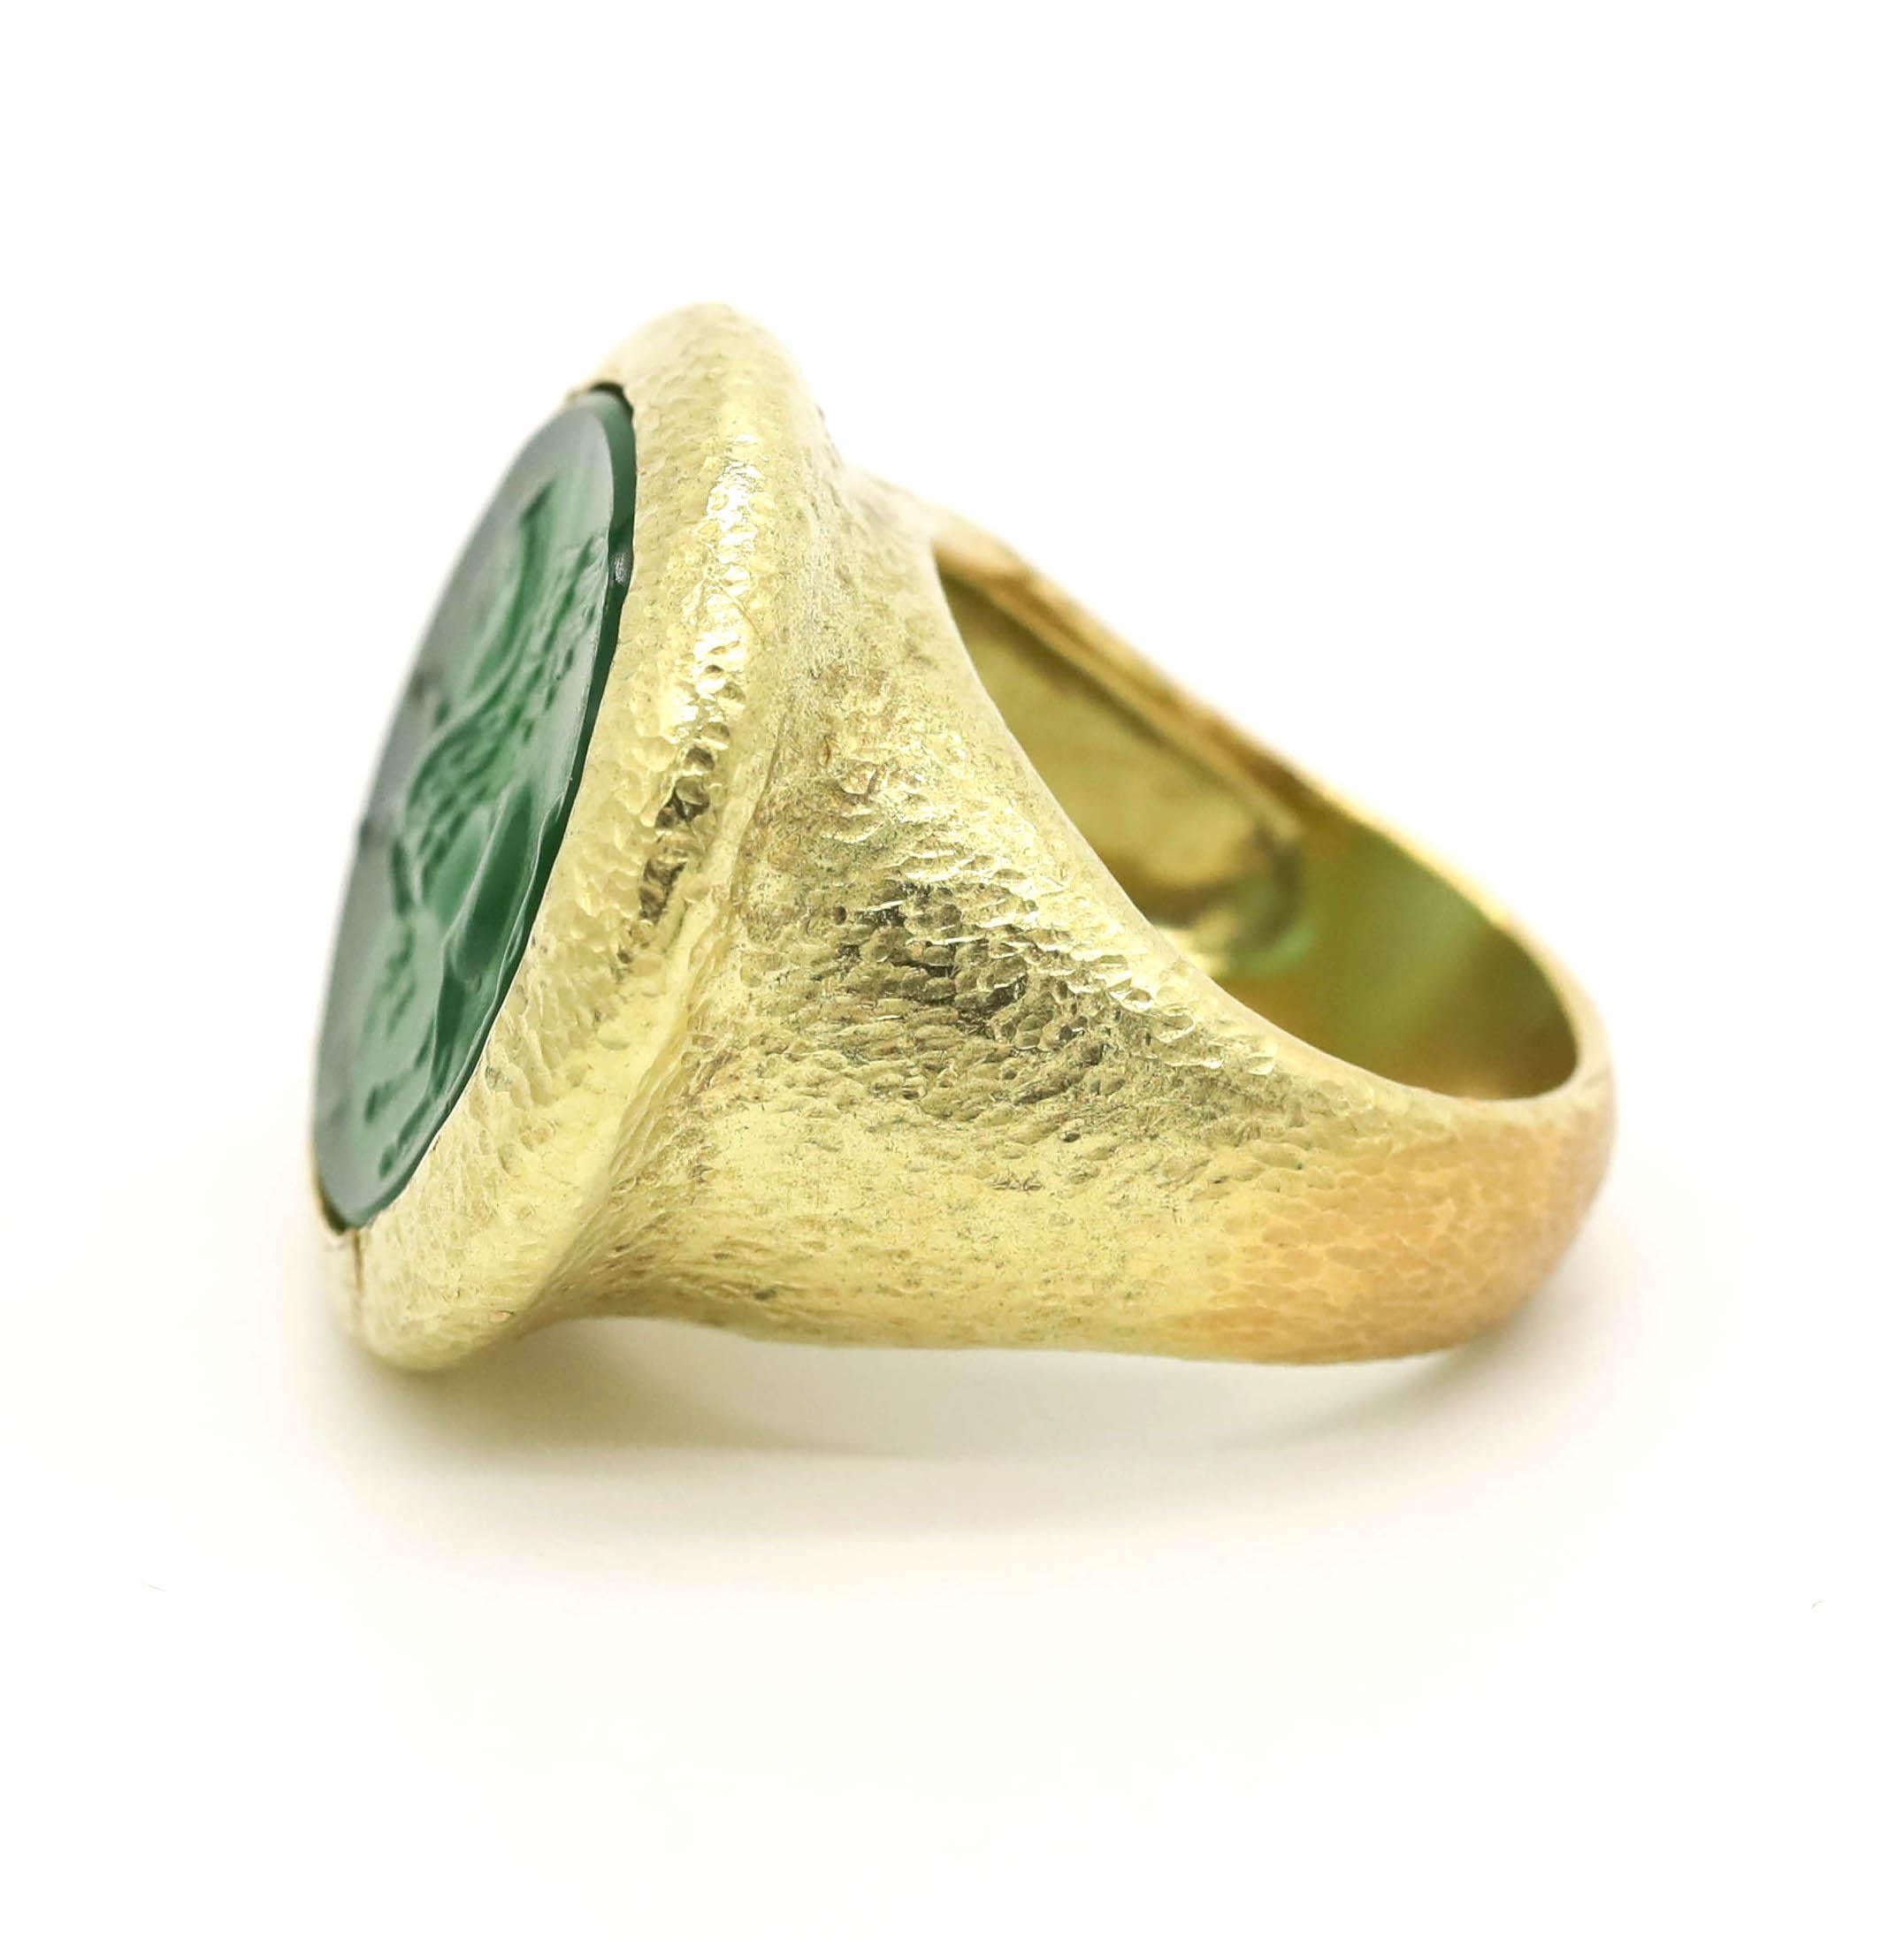 New Victorian Green Italian Murano Glass Carved Intaglio Ring 18k Yellow Gold

The opposite of a cameo, an intaglio is created by carving below the surface to produce an image in relief, with the purpose of pressing into sealing wax. Intaglios were